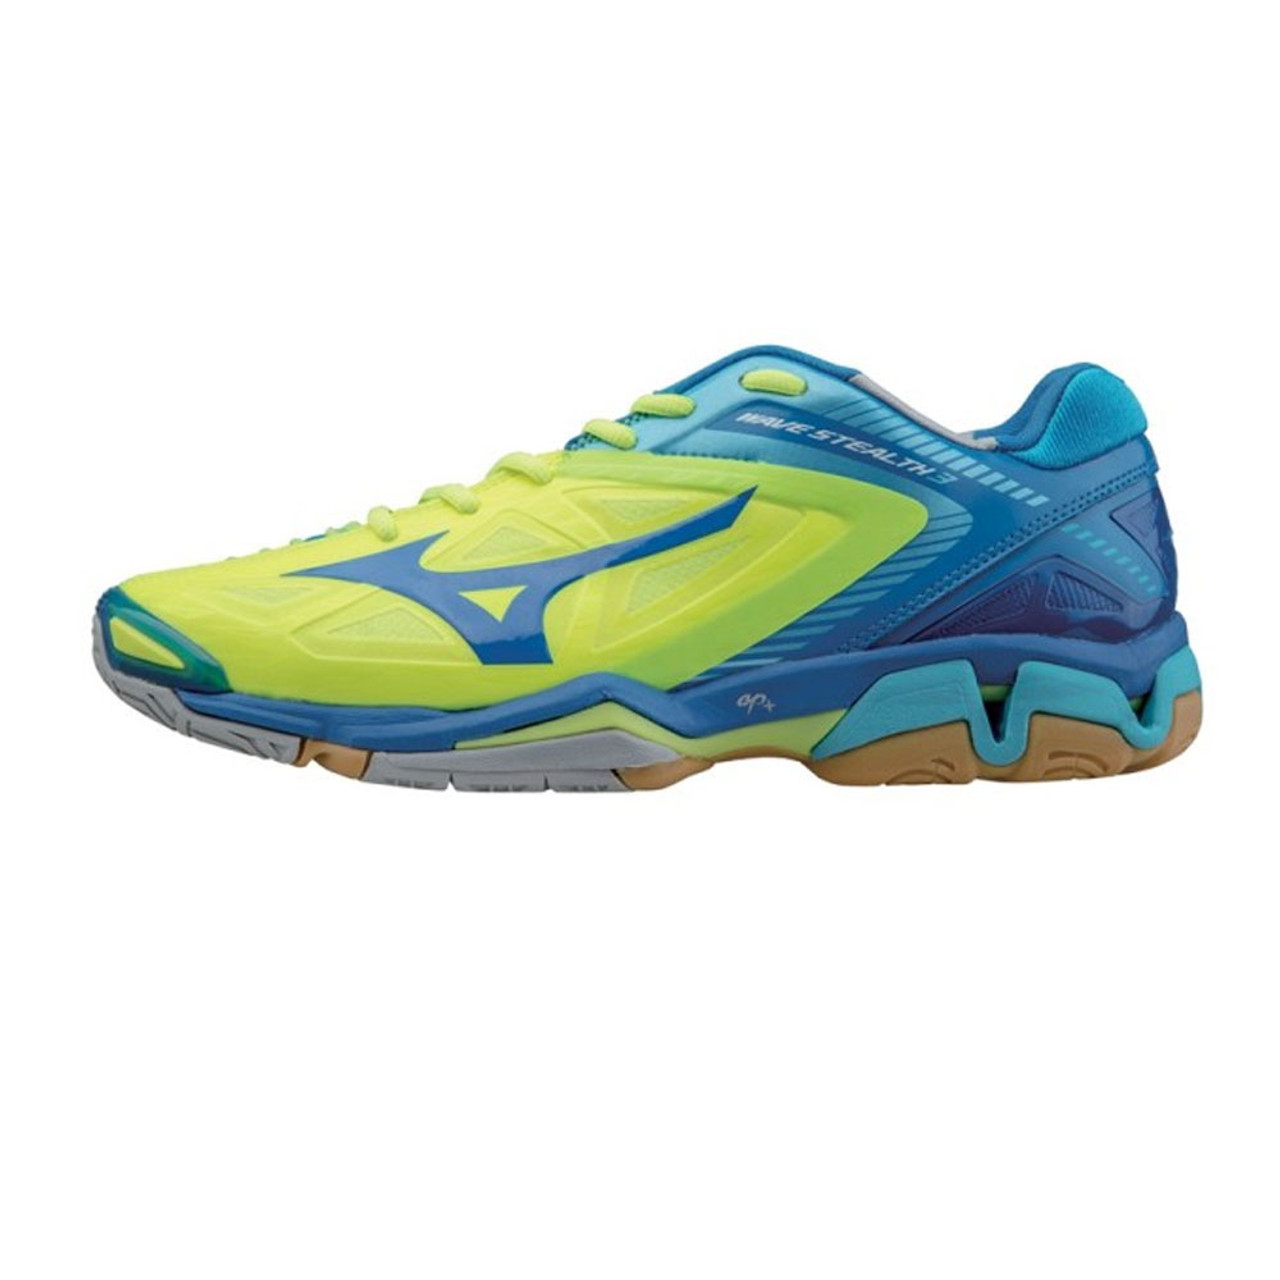 yellow mizuno volleyball shoes